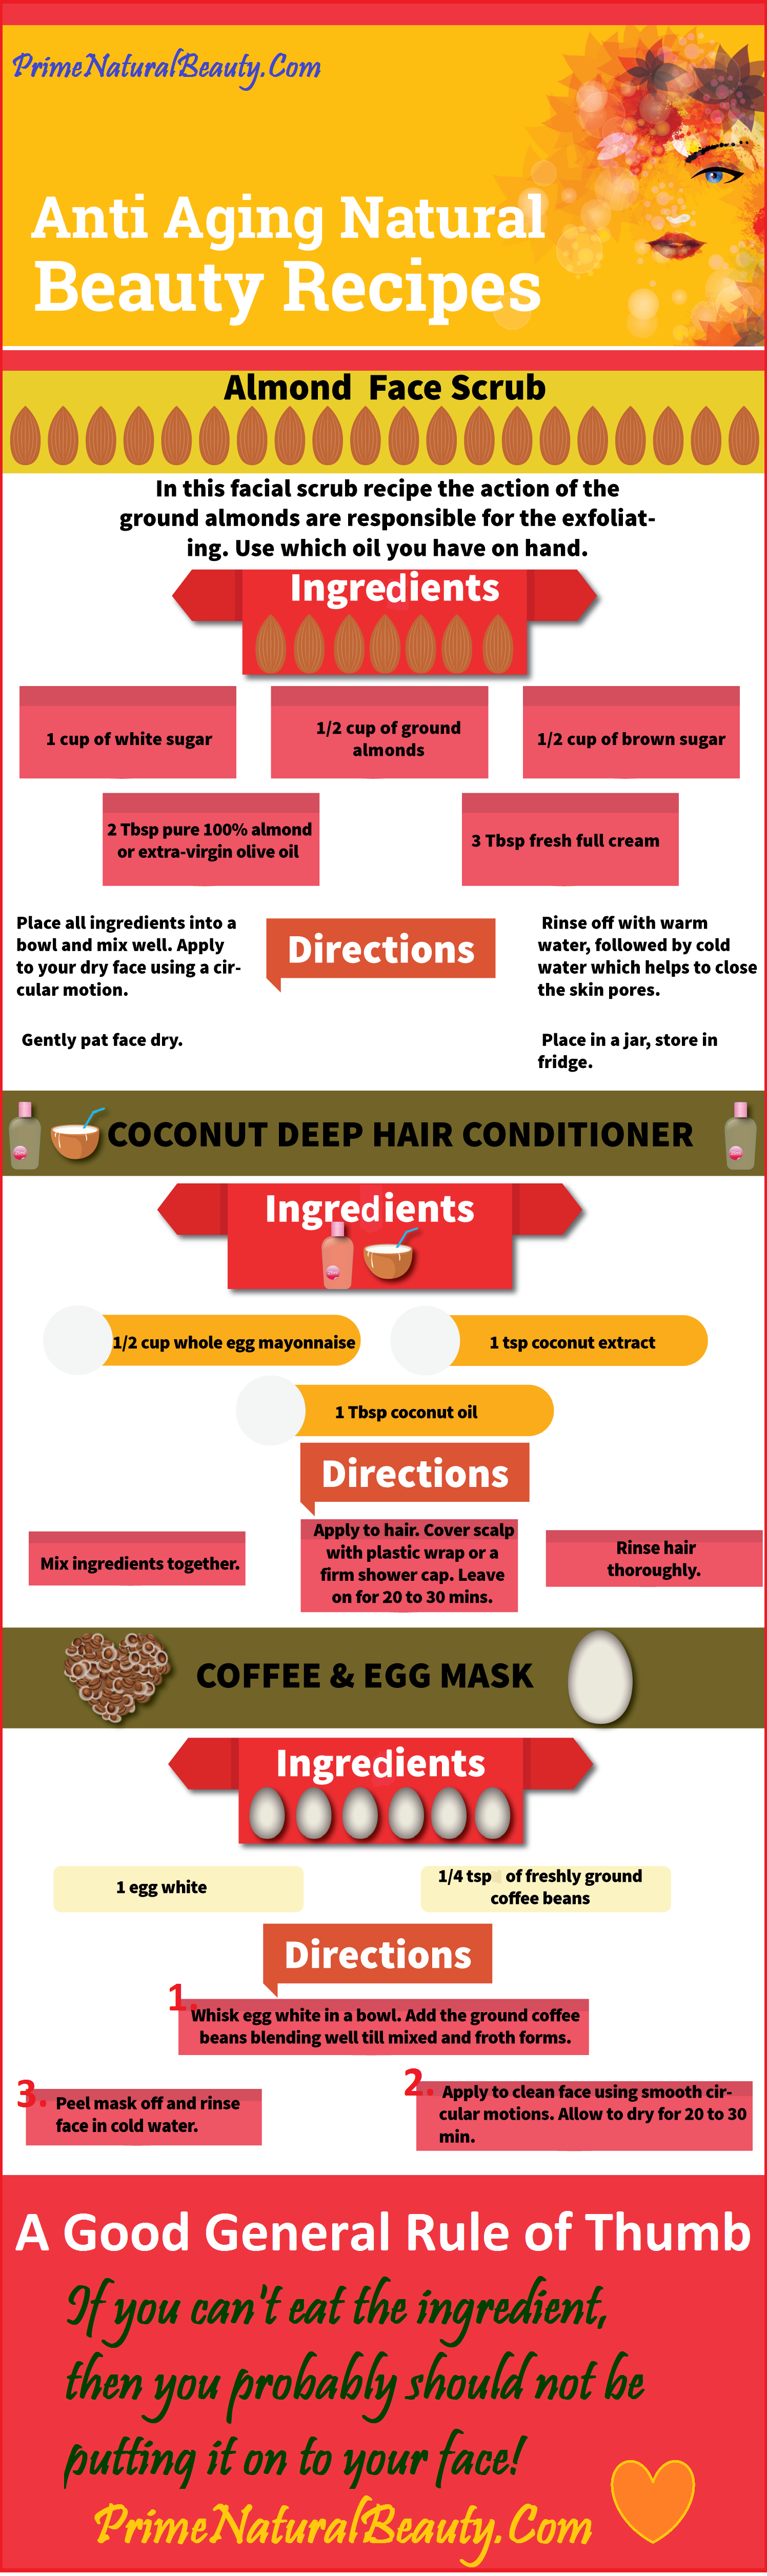 Anti Aging Natural Beauty Recipes INFOGRAGHIC 